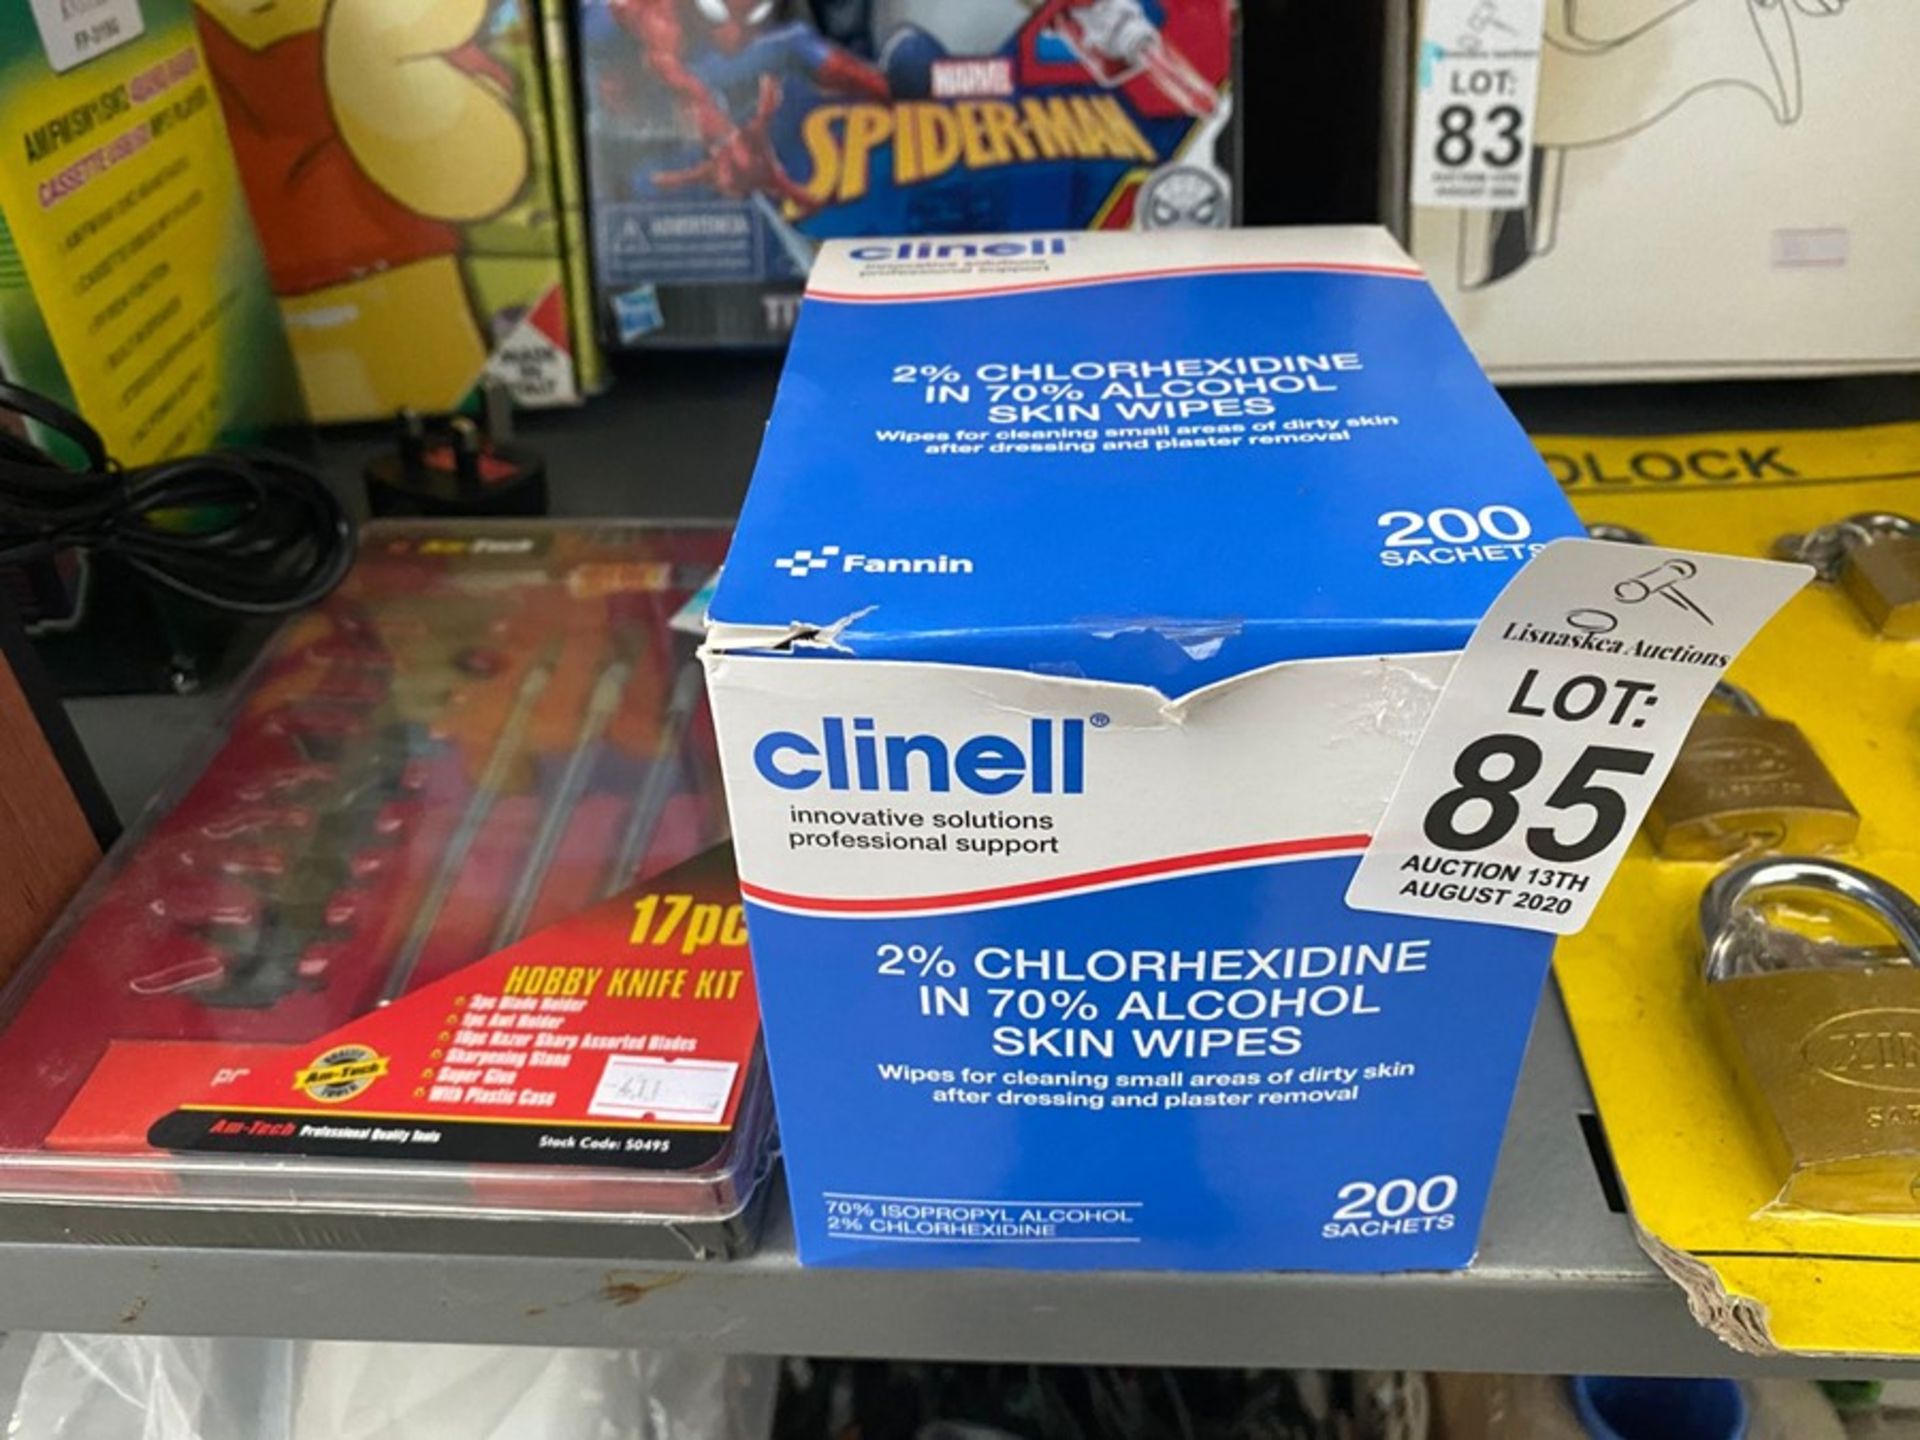 BOX OF CLINELL ALCOHOL SKIN WIPES